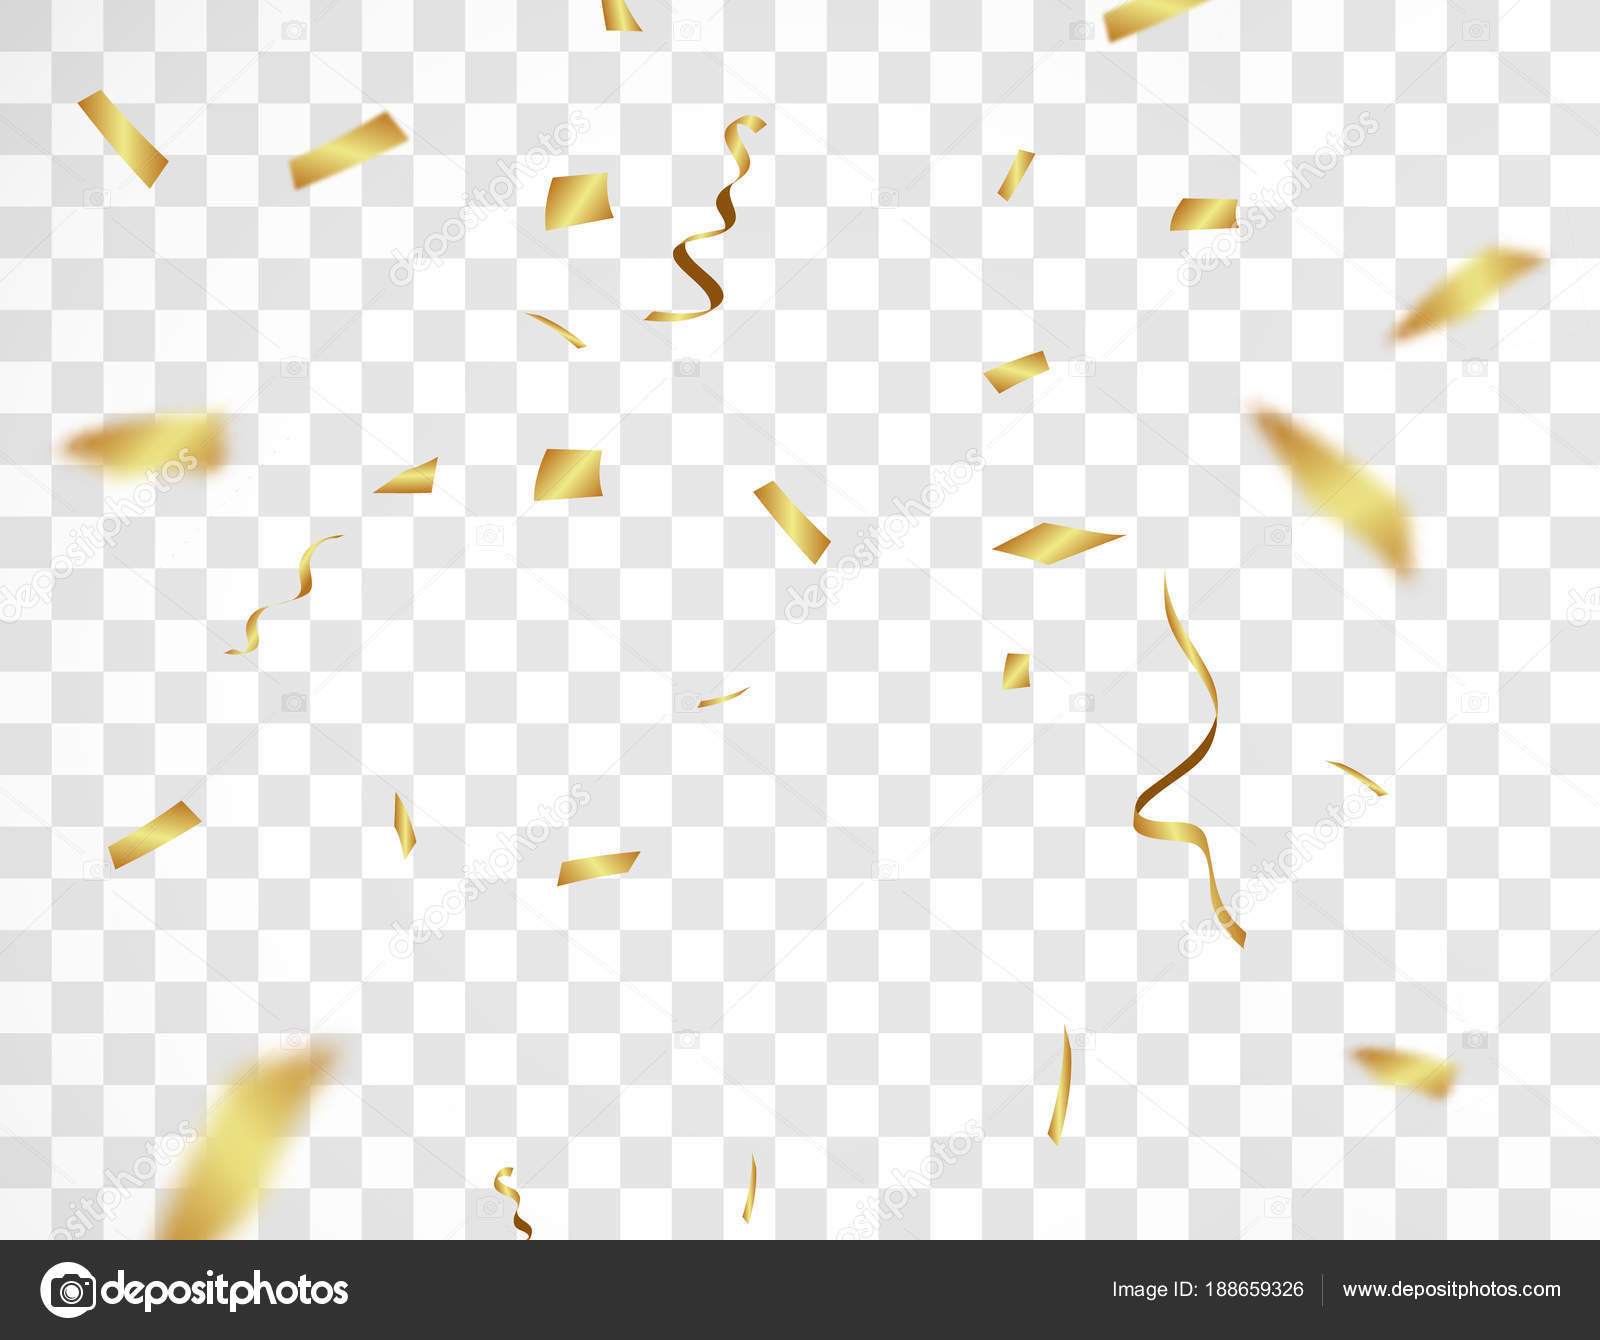 The Realistic Gold Confetti Background Vector Illustration Holiday Design On A Transparent Background Vector Image By C Worsan Vector Stock